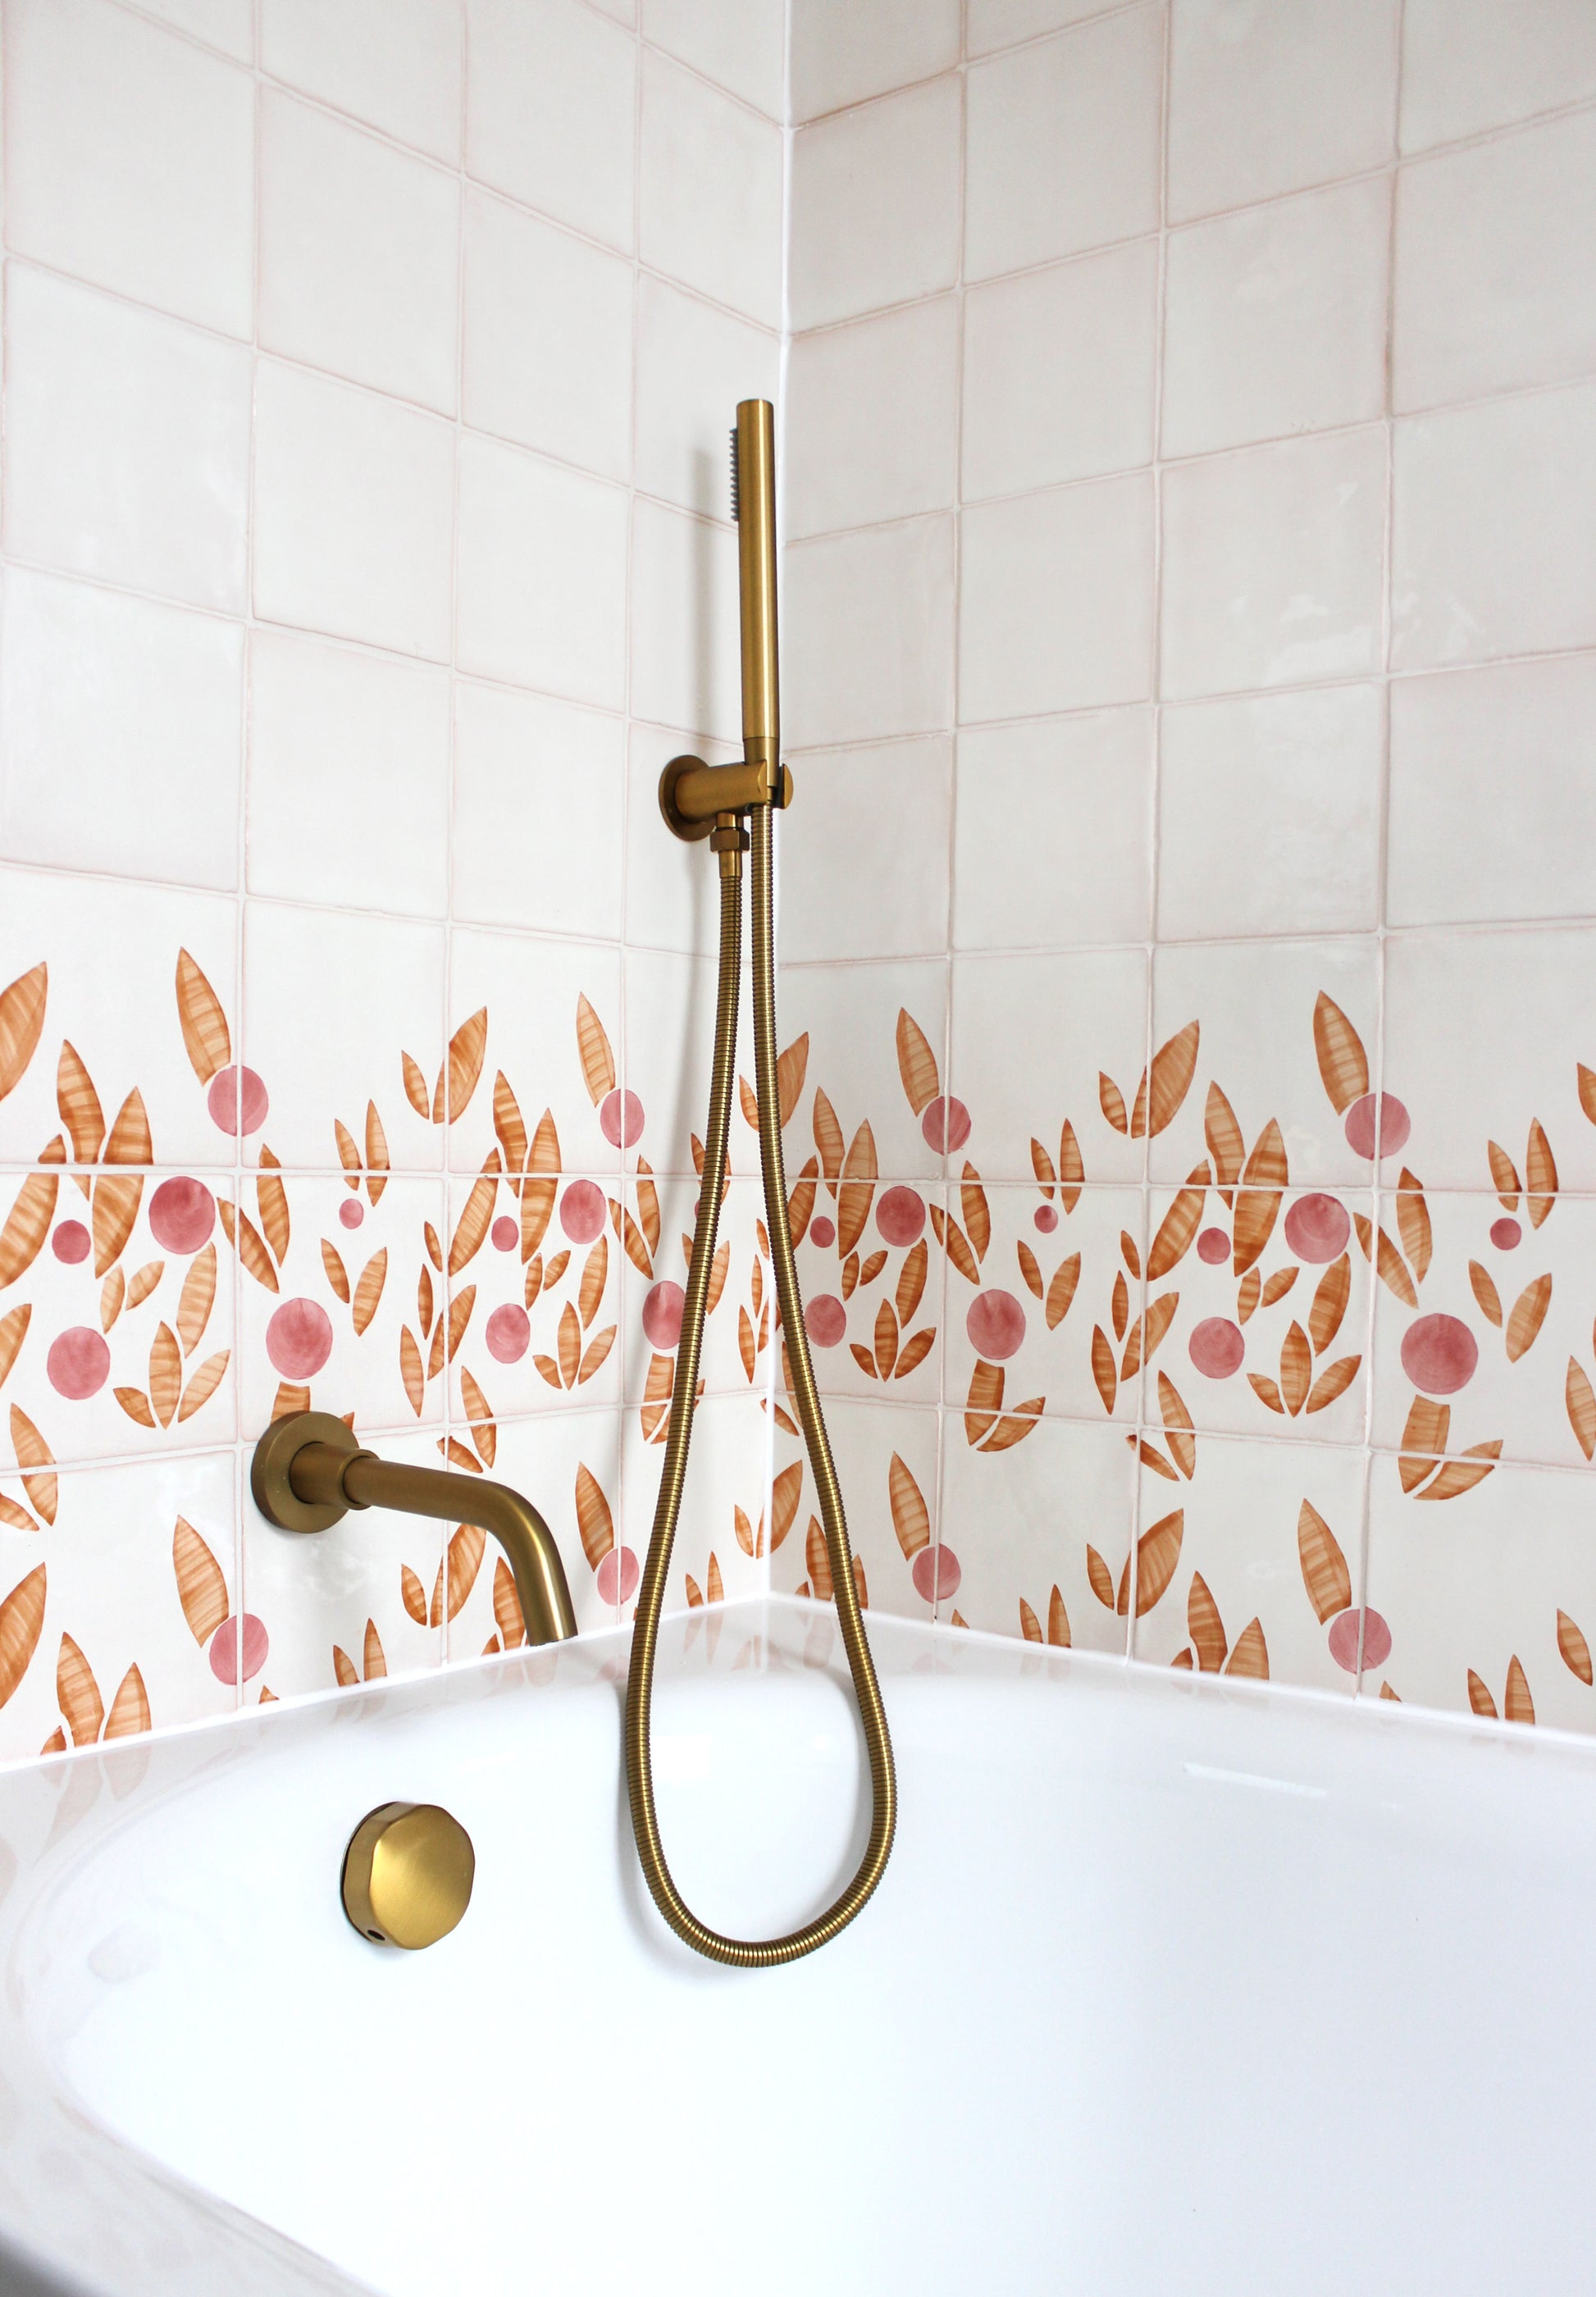 Cherry tile in Rust & Rose by Feild. Handmade and hand painted glazed terracotta tiles. Installed around a bath 